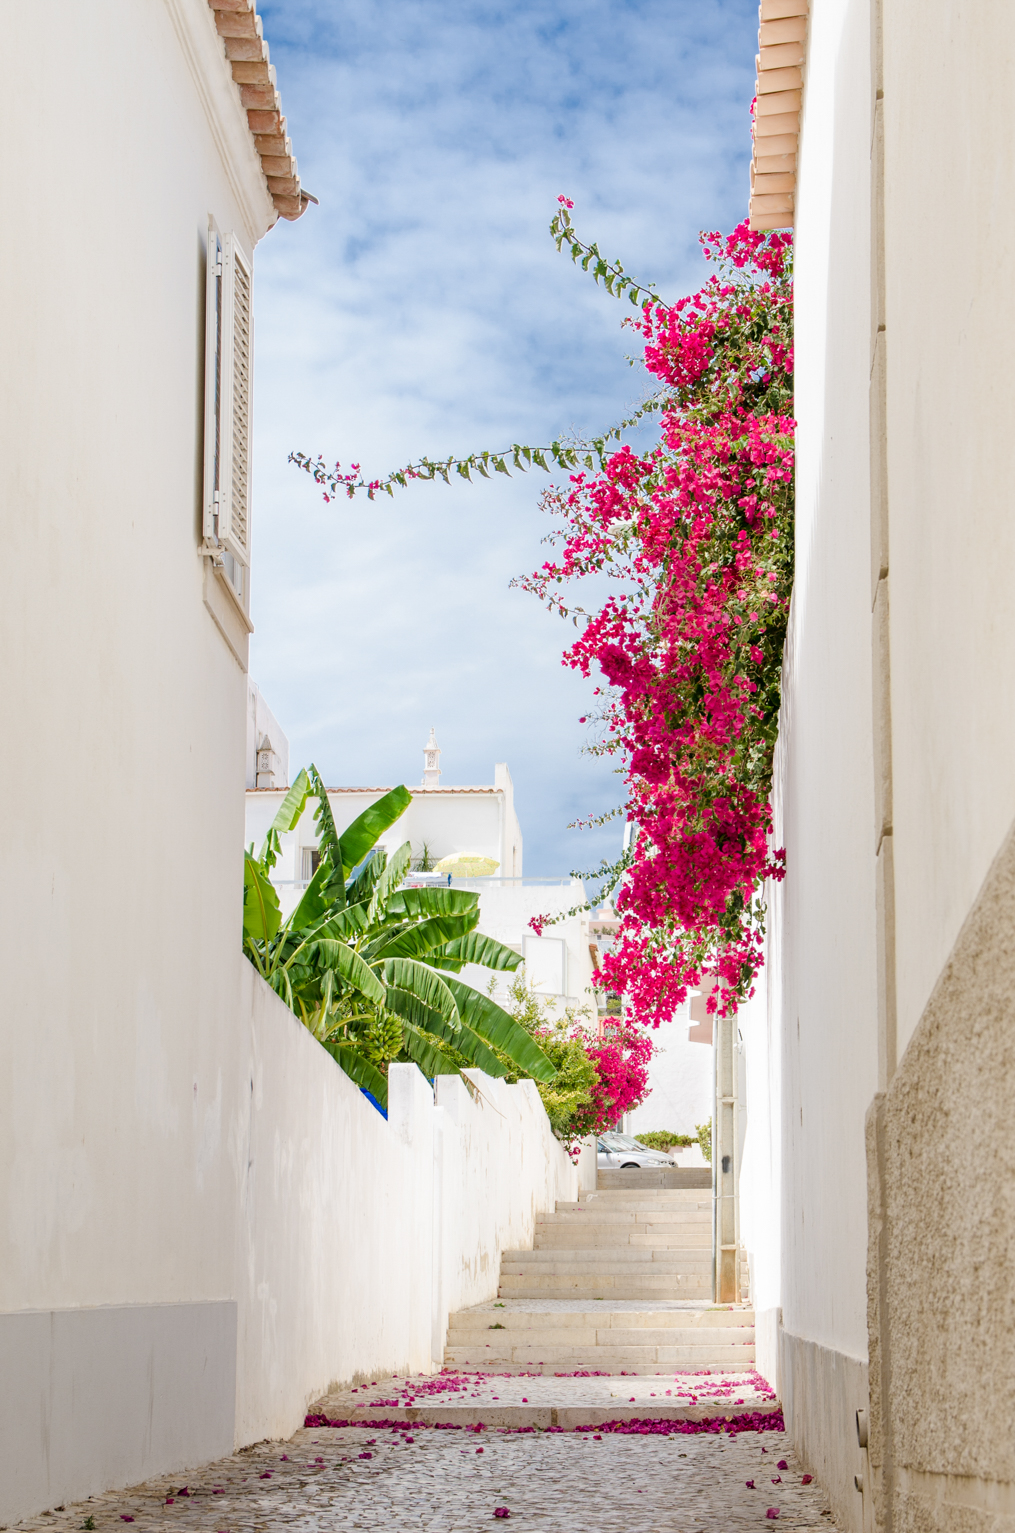 Streets of Albufeira, Portugal